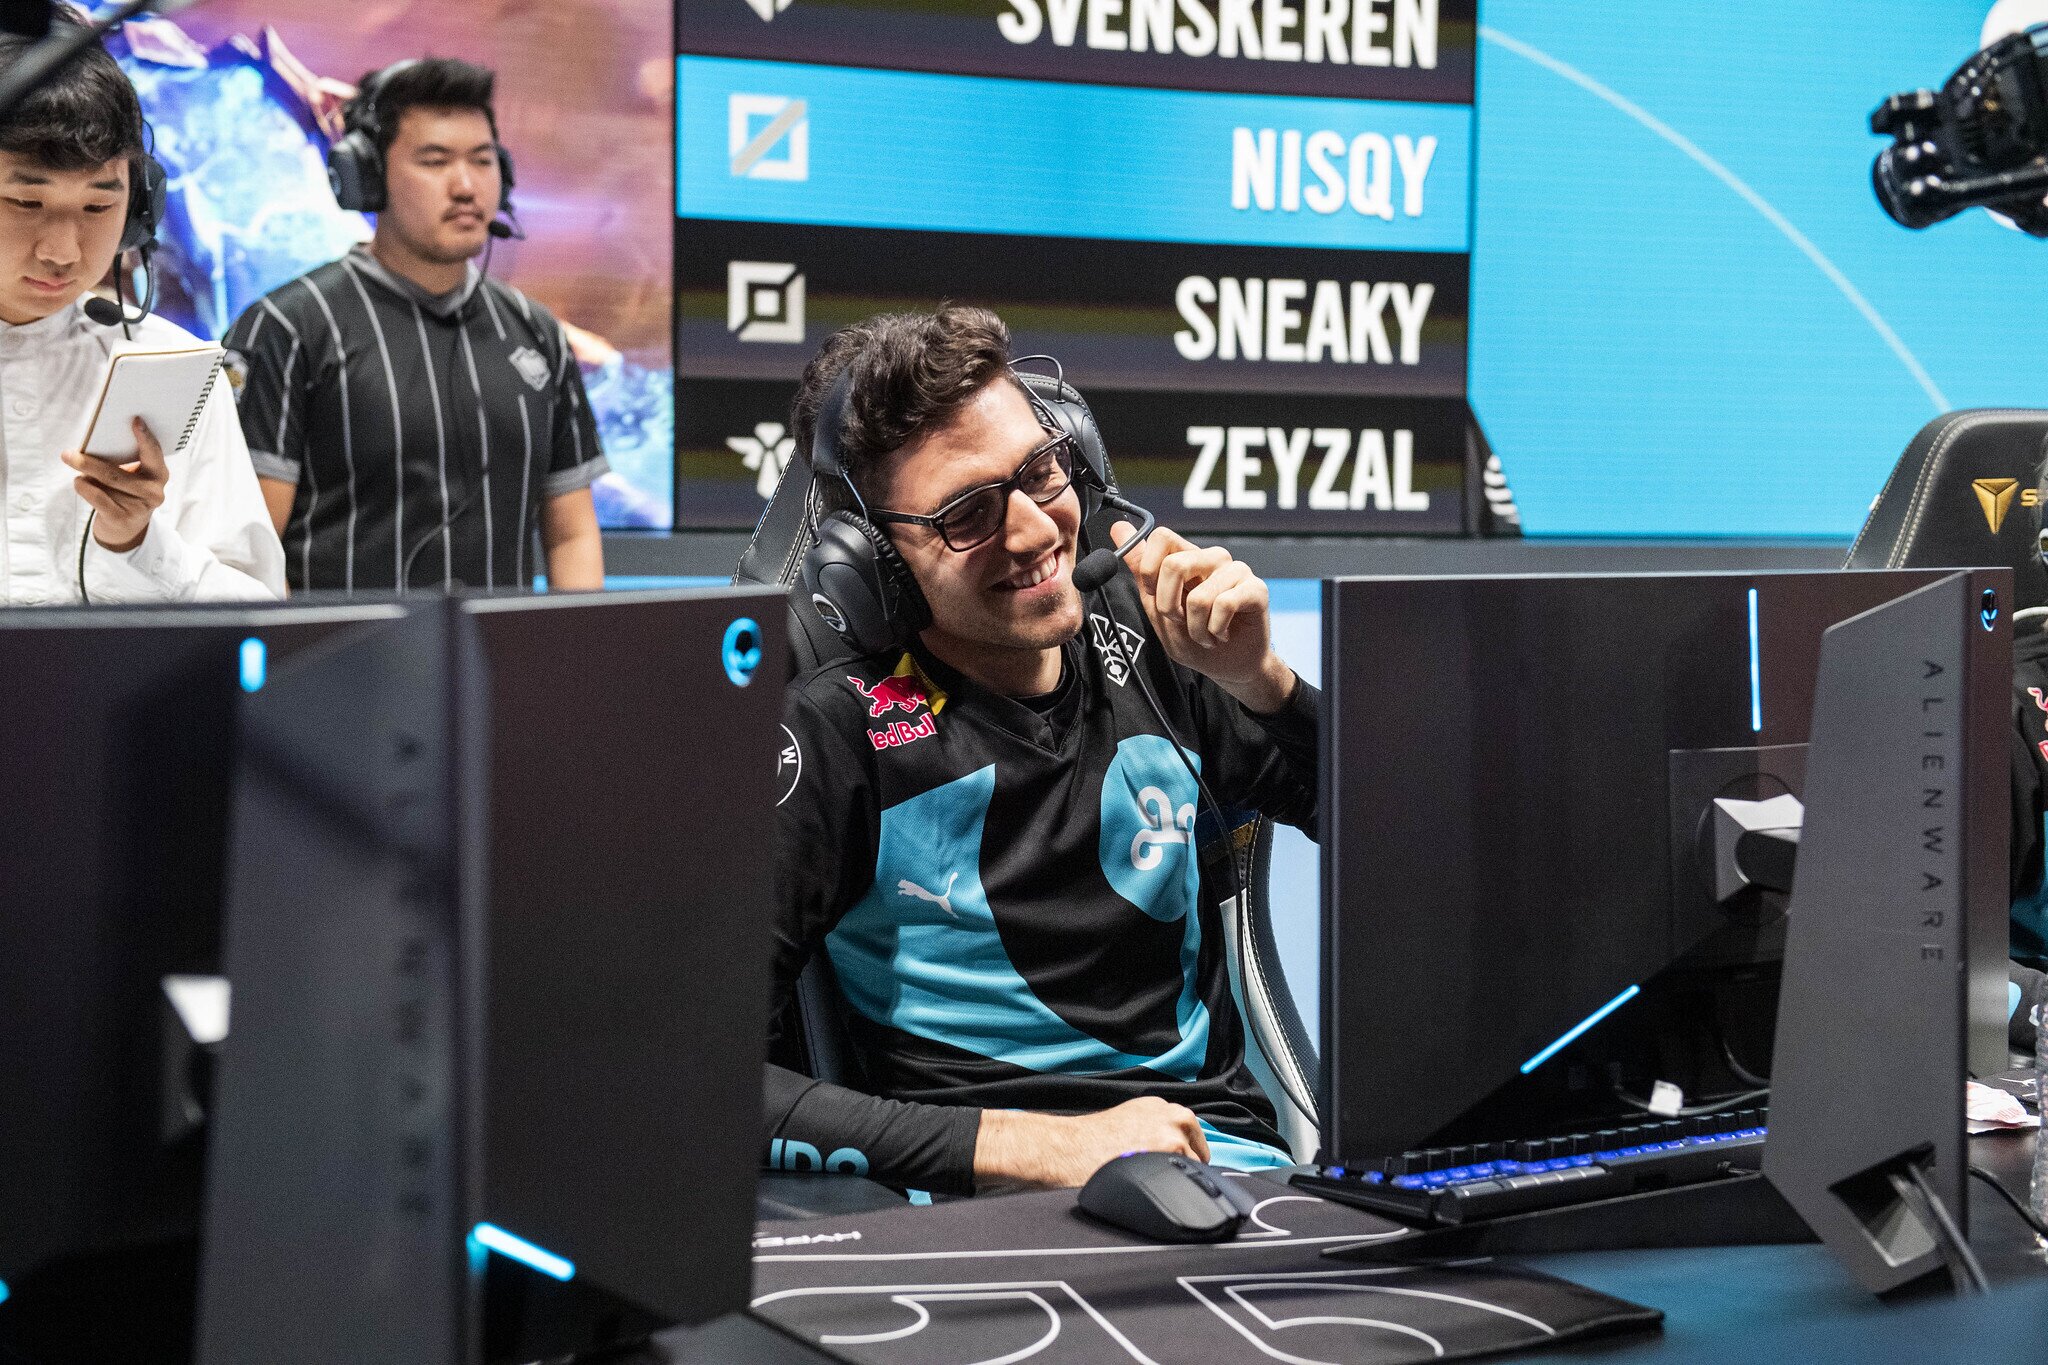 Despite a 7.8K gold disadvantage, Cloud9 rallied to defeat TSM in the LCS (Photo courtesy of Riot Games)